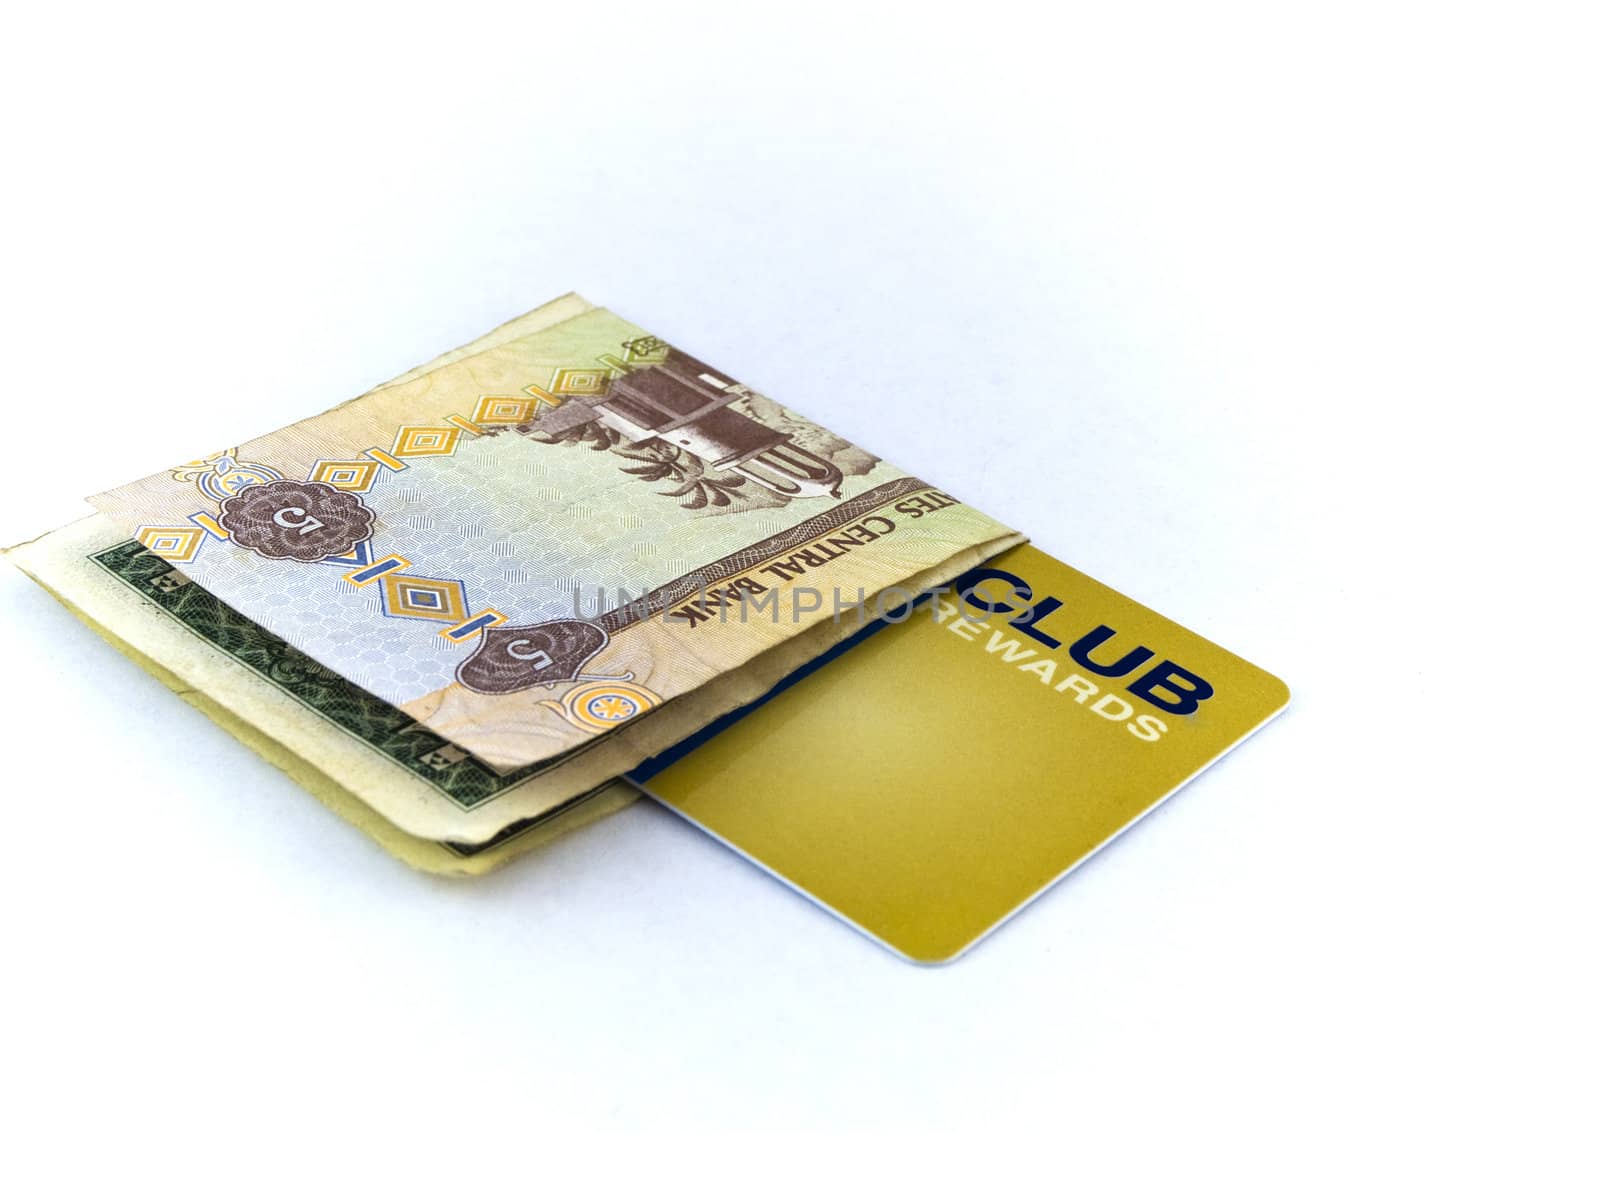 Five Dirham Note and Gold Membership Club Card on White Backgrou by bobbigmac